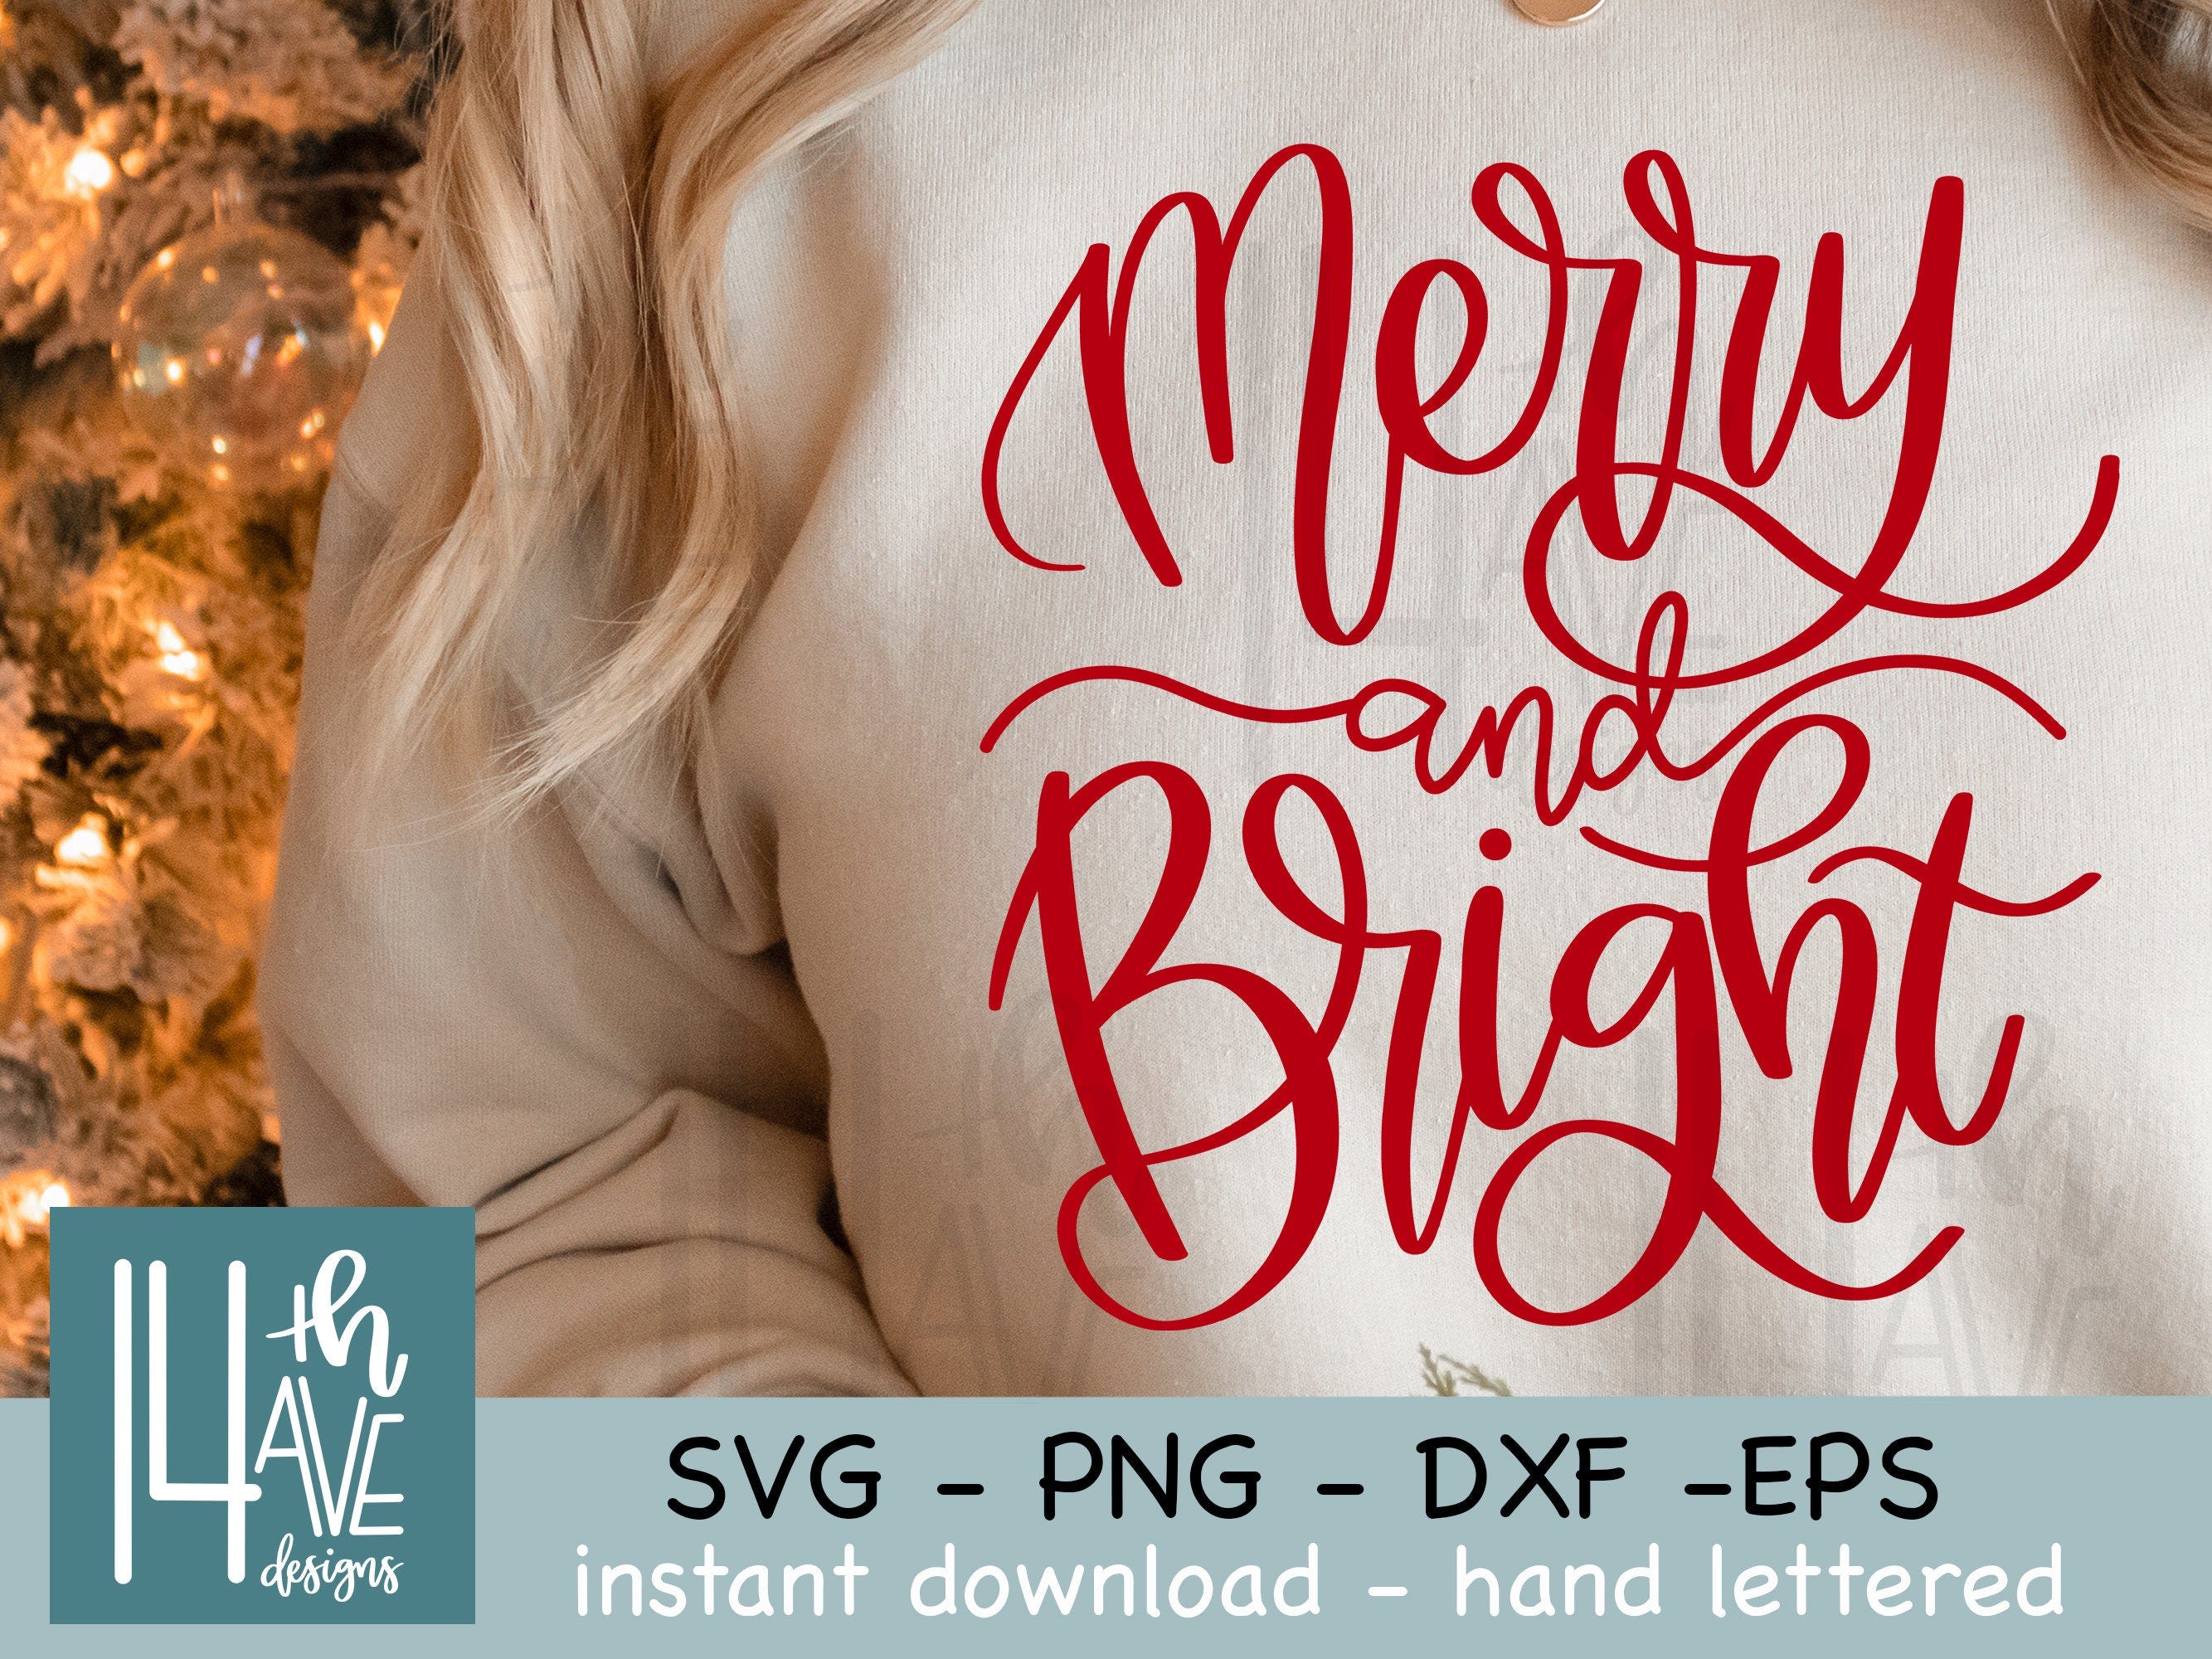 Merry and Bright SVG cut file, Merry and Bright PNG, Christmas SVG, svg, png, dxf, Uses - cut file, overlay, clip art, sublimation